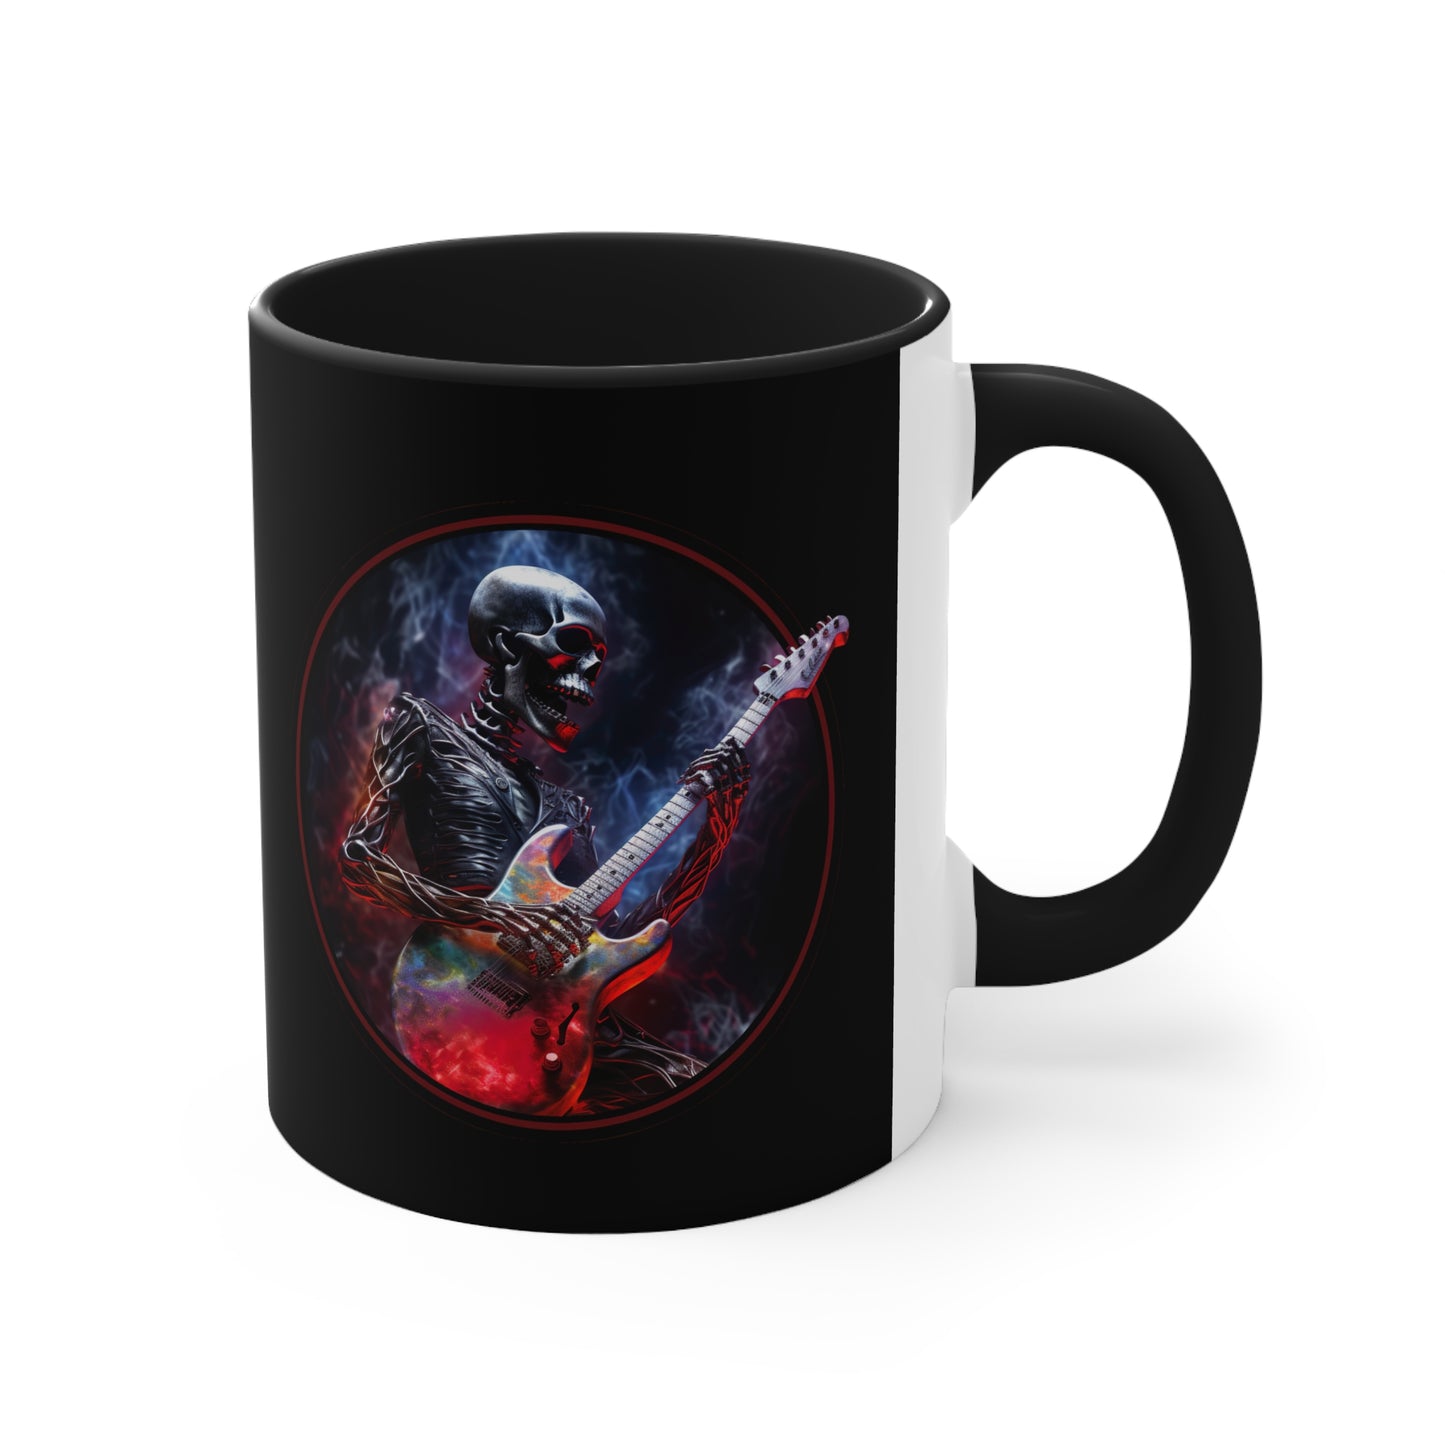 After the CROSSROADS II Coffee Mug, full color Electric Guitar-playing Skeleton Musician Gift, 11oz, Red or Black for guitarists